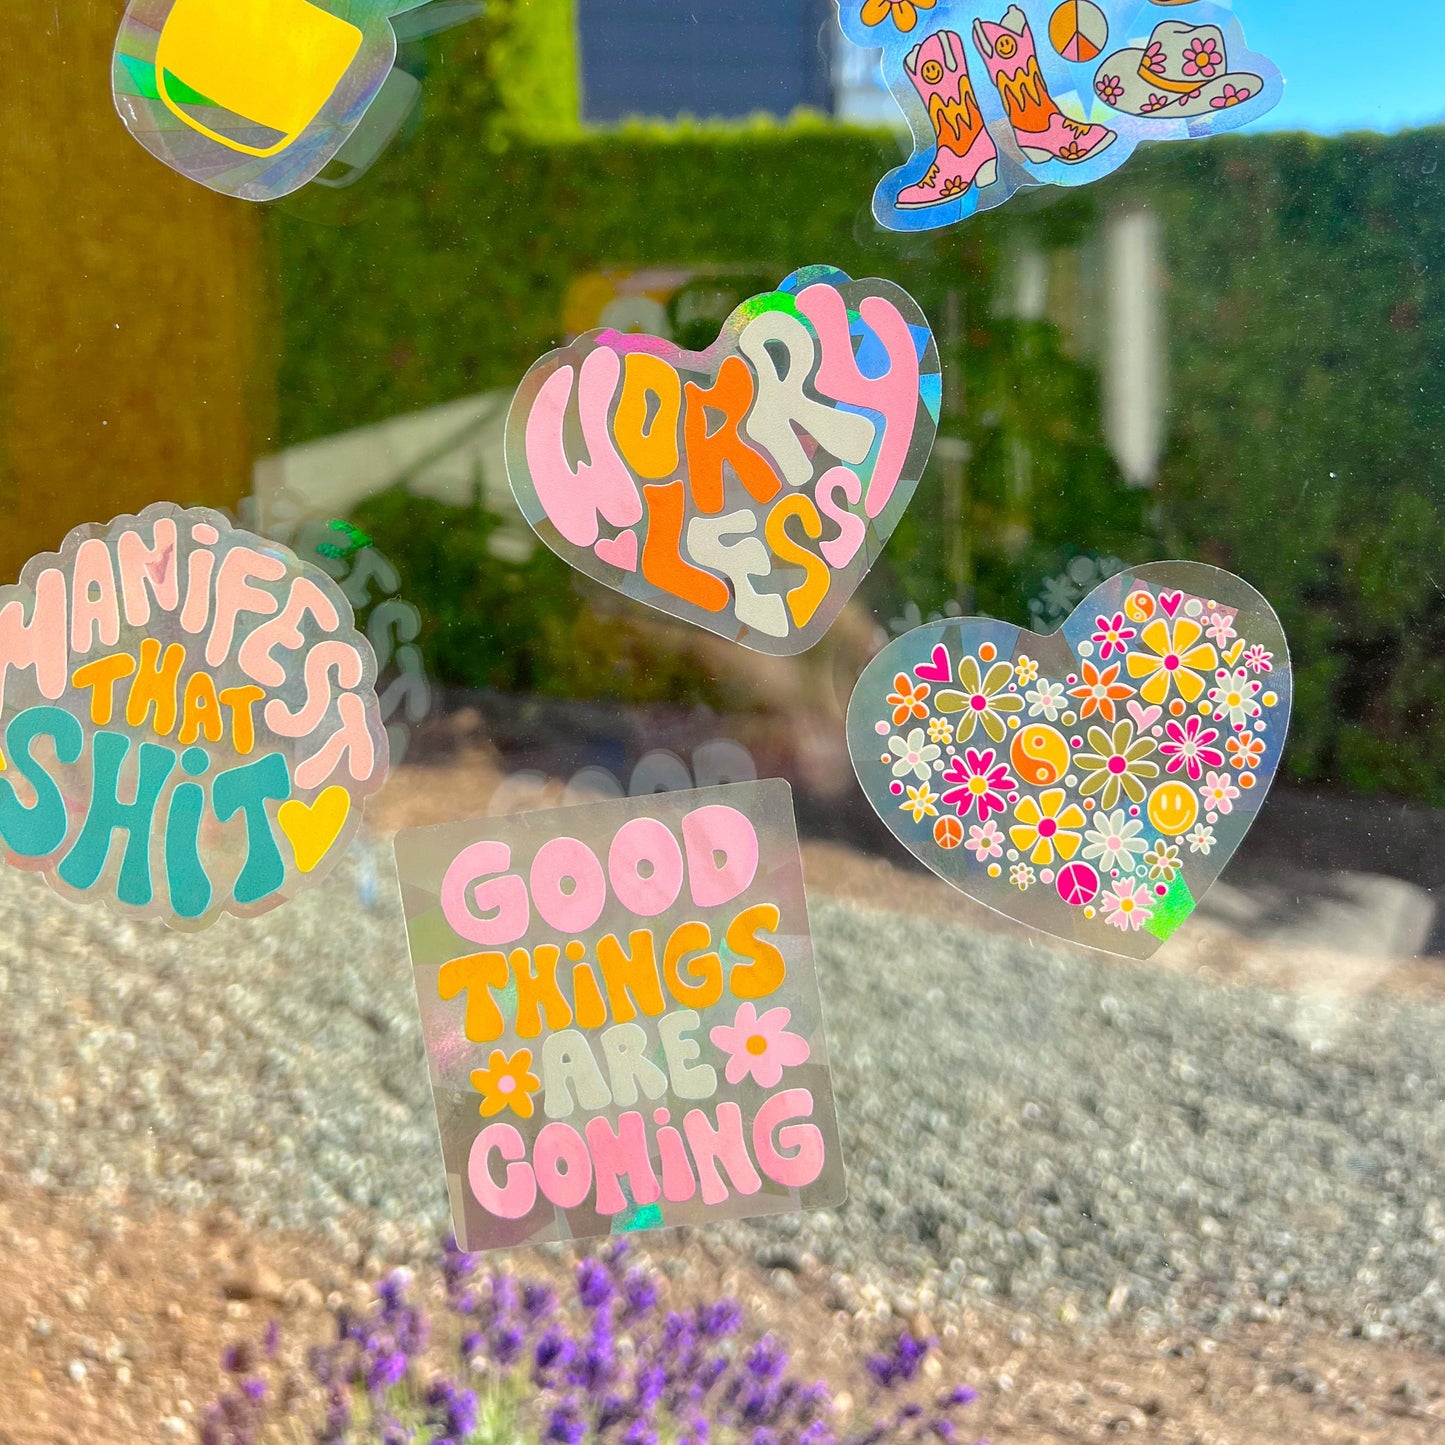 Suncatcher Sticker - Good Things Are Coming